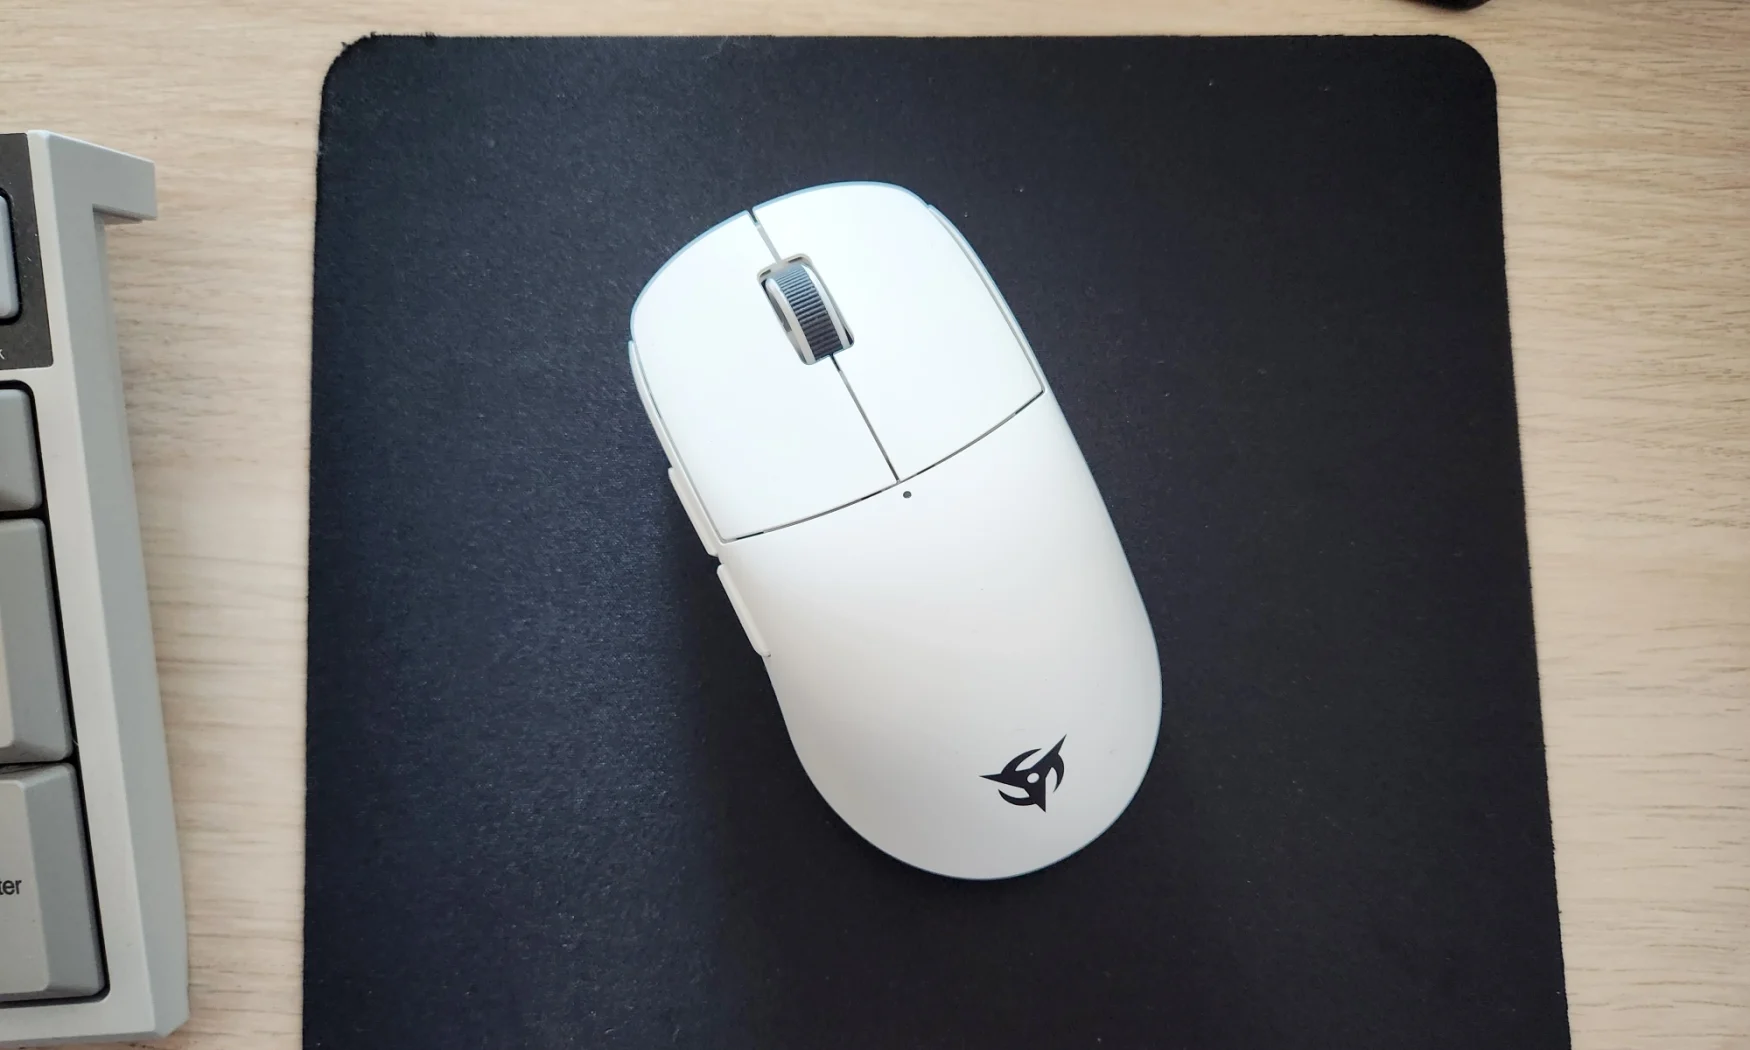 A white gaming mouse called the Ninjutso Sora rested on top of a black mouse pad on a desk.